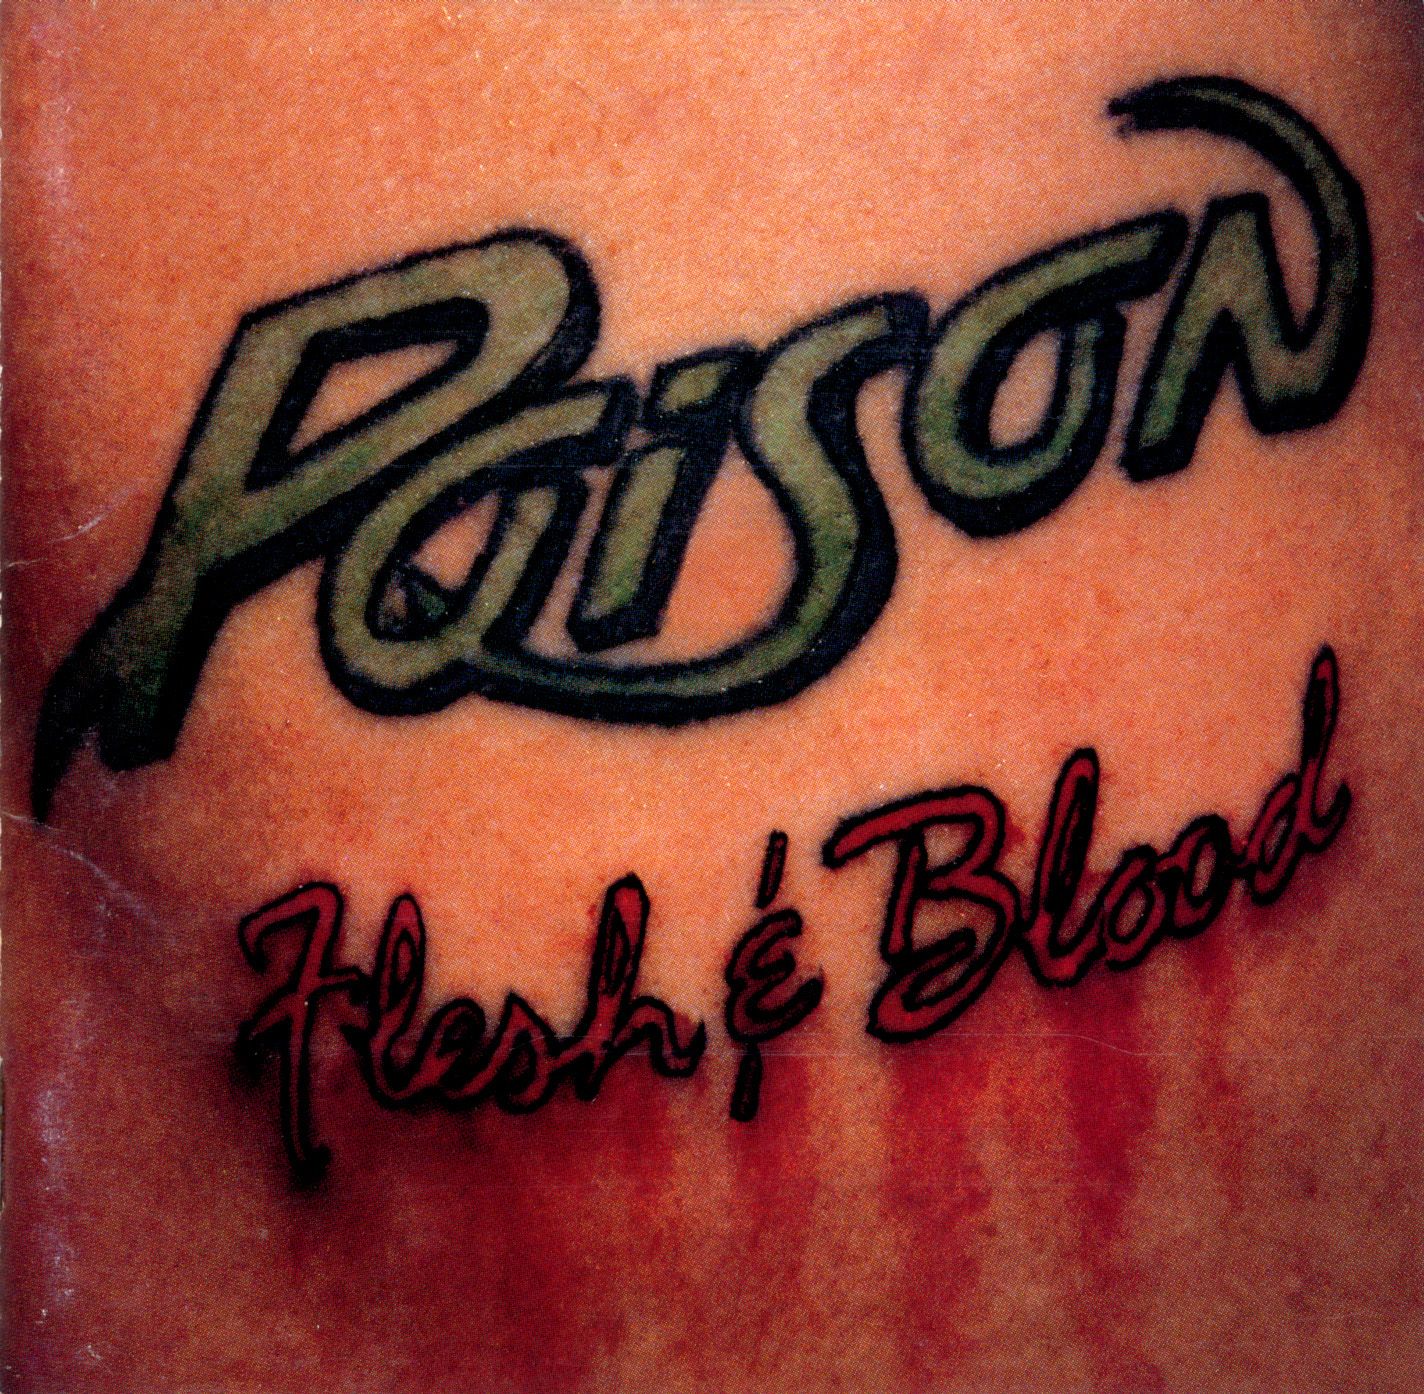 Art for Something to Believe In by Poison